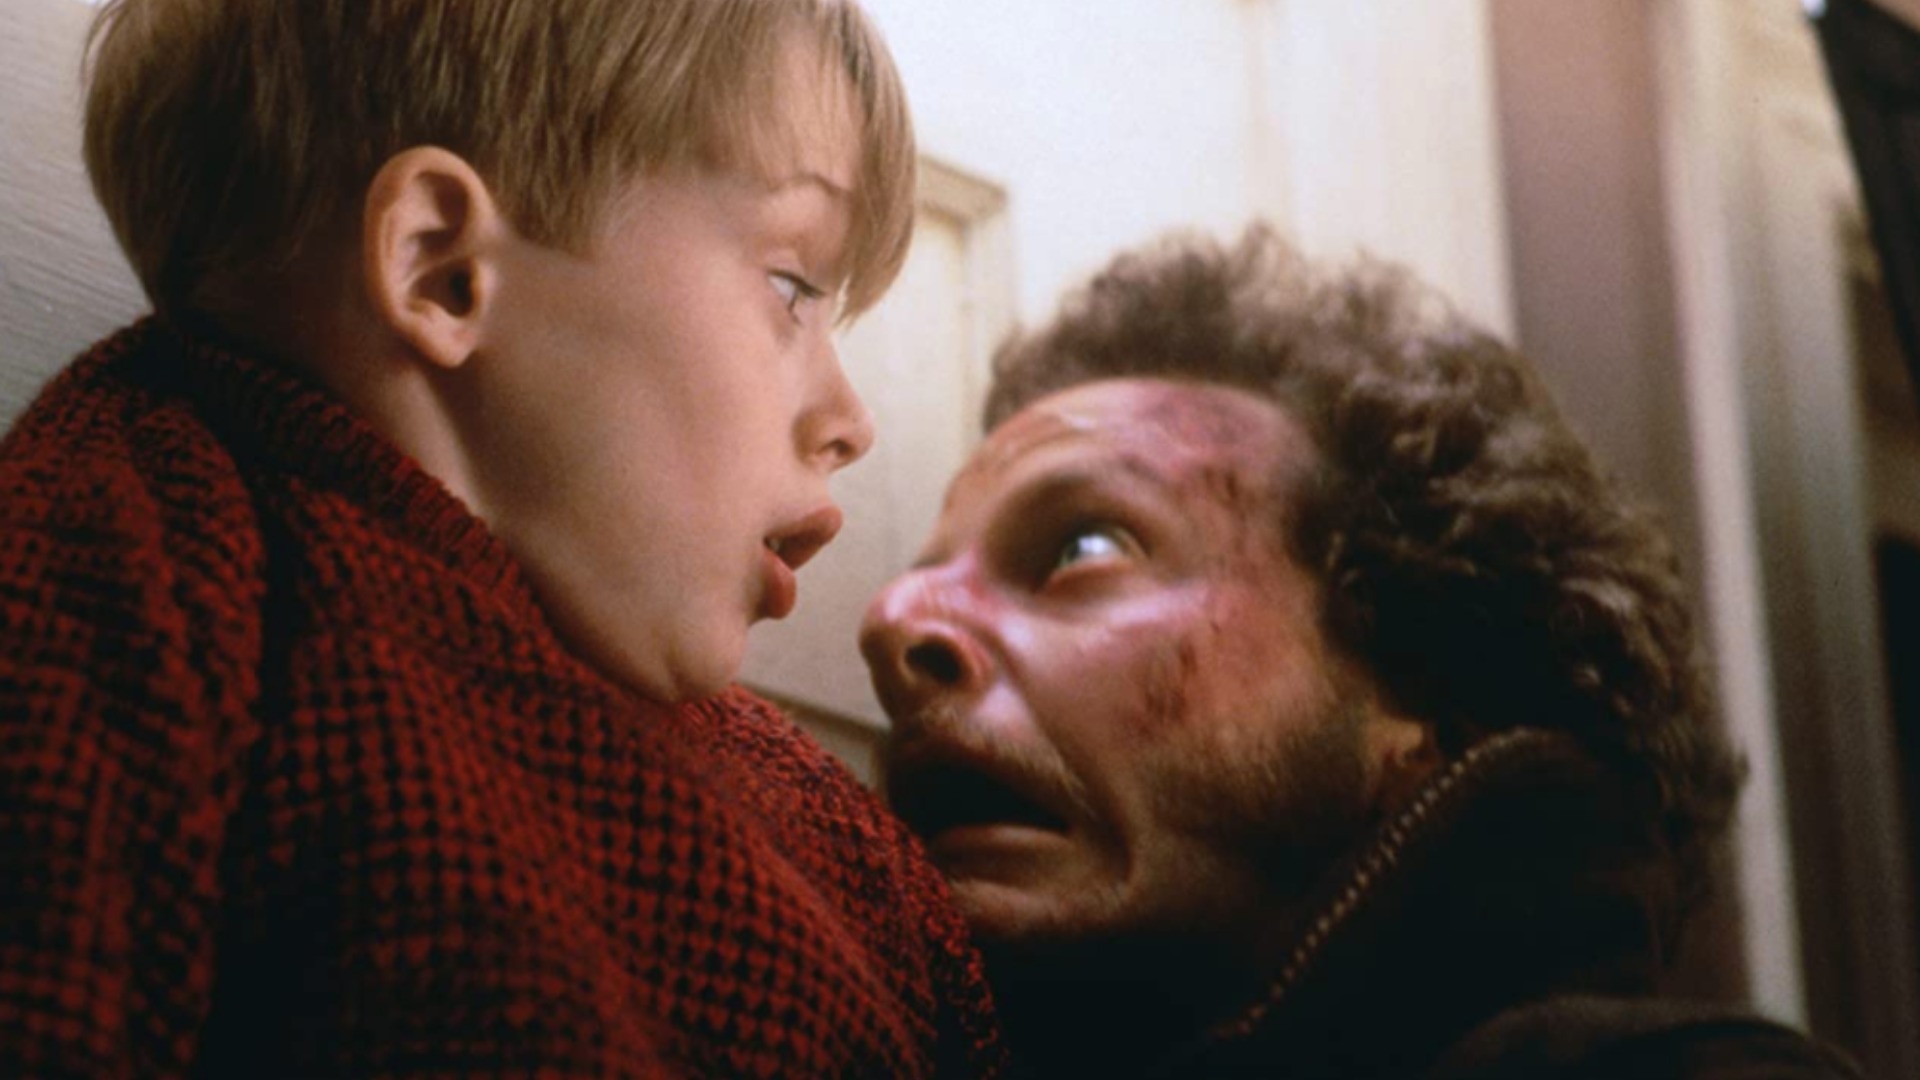 Home Alone cast what are they up to now? GamesRadar+